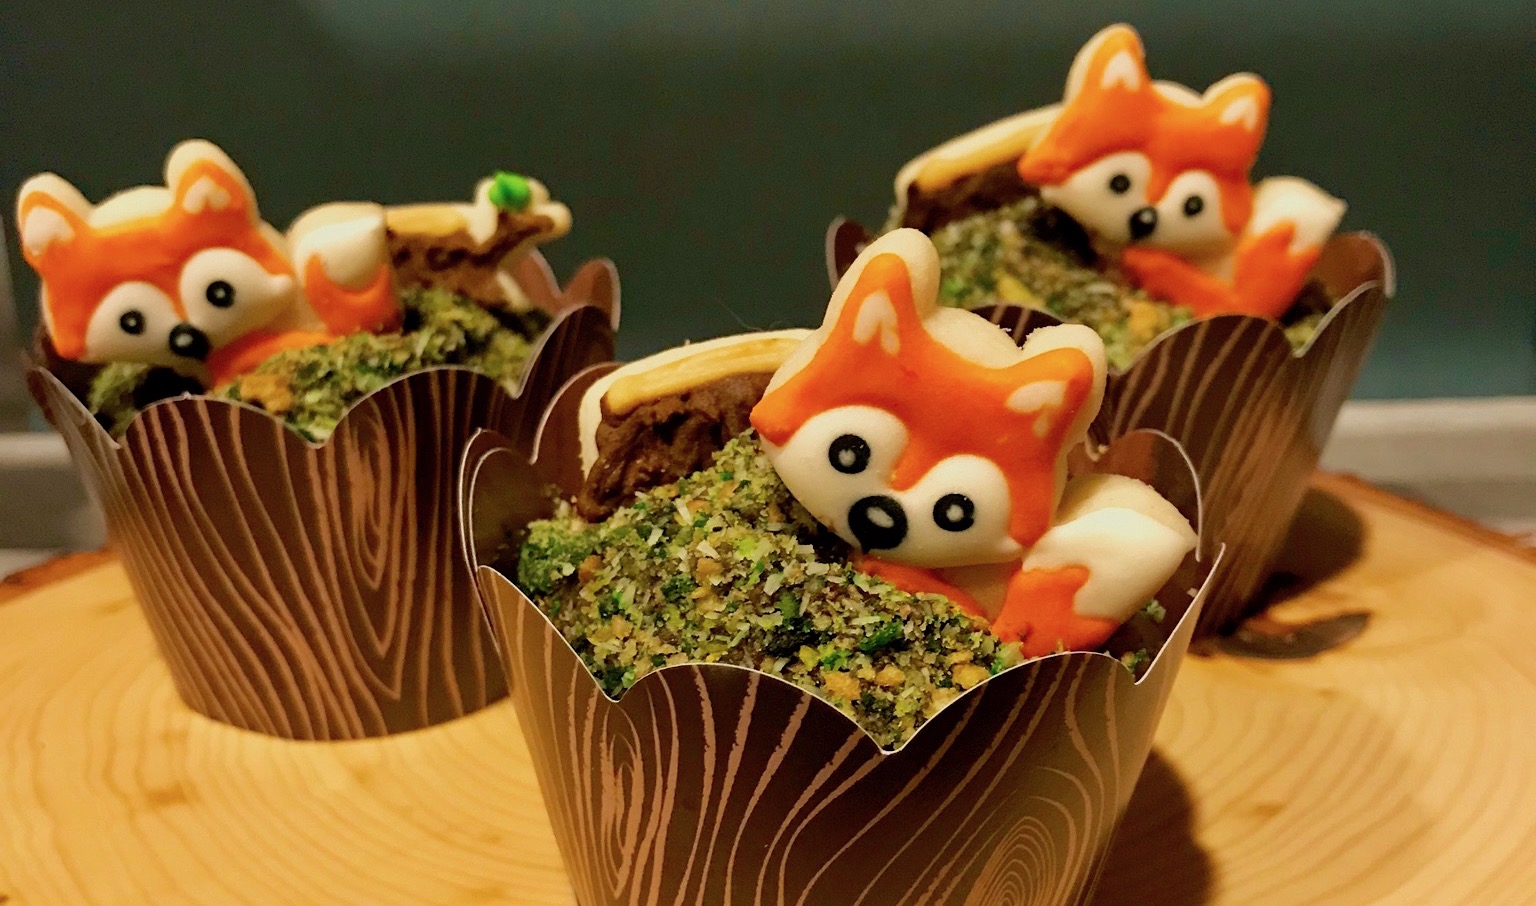 Make gorgeous mossy cupcakes for your woodland birthday party with this easy how to!